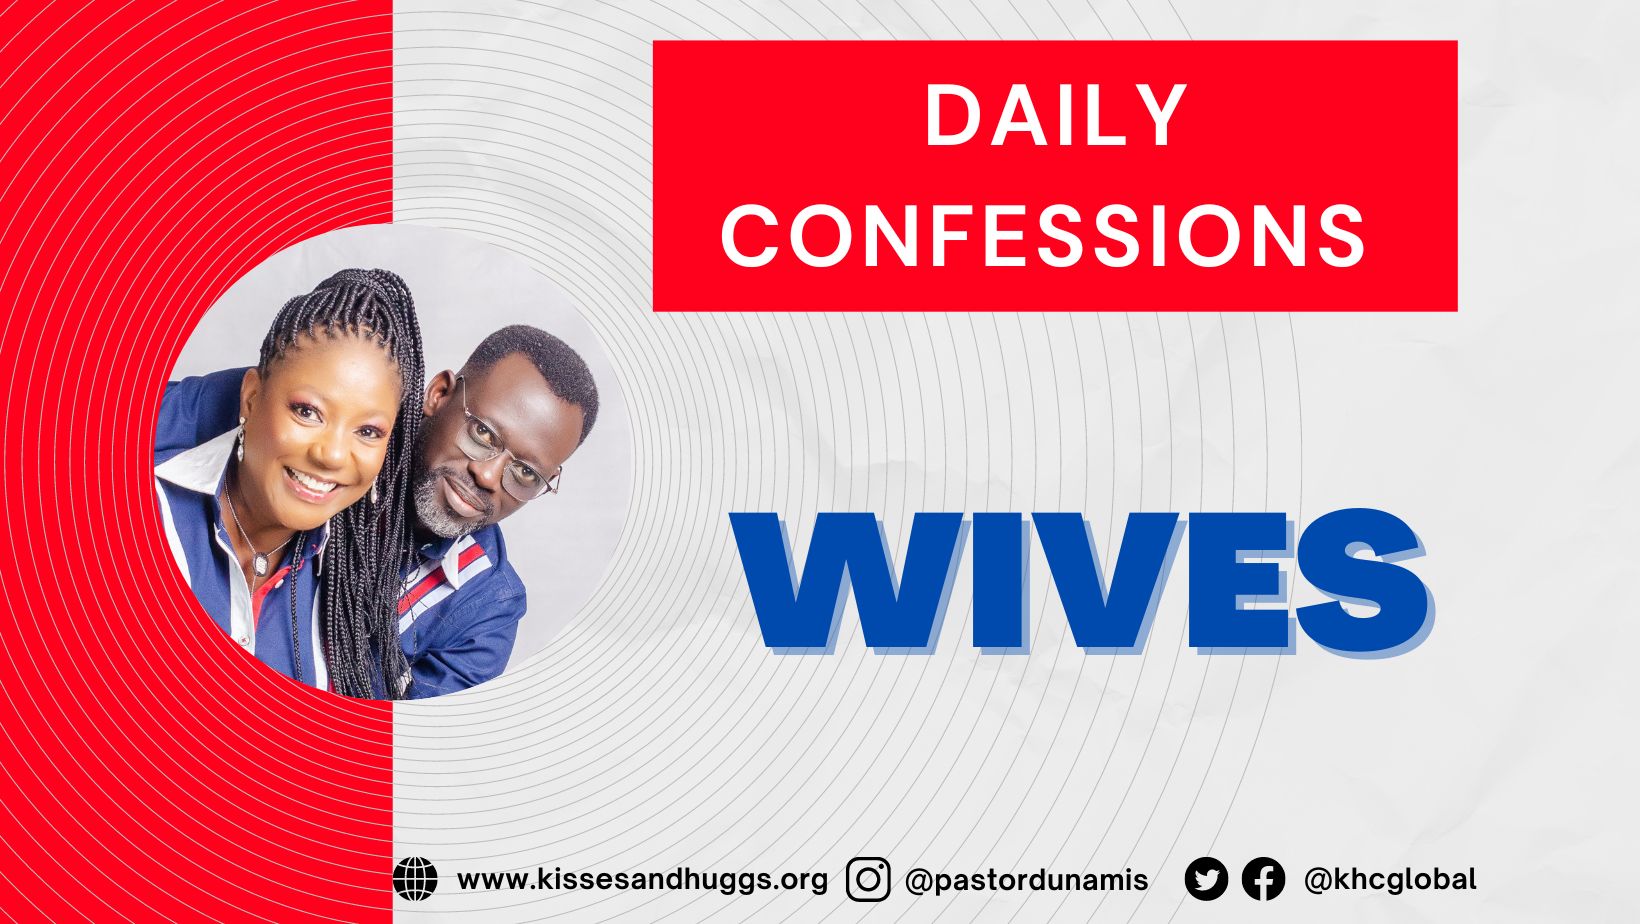 Daily Confessions For Wives